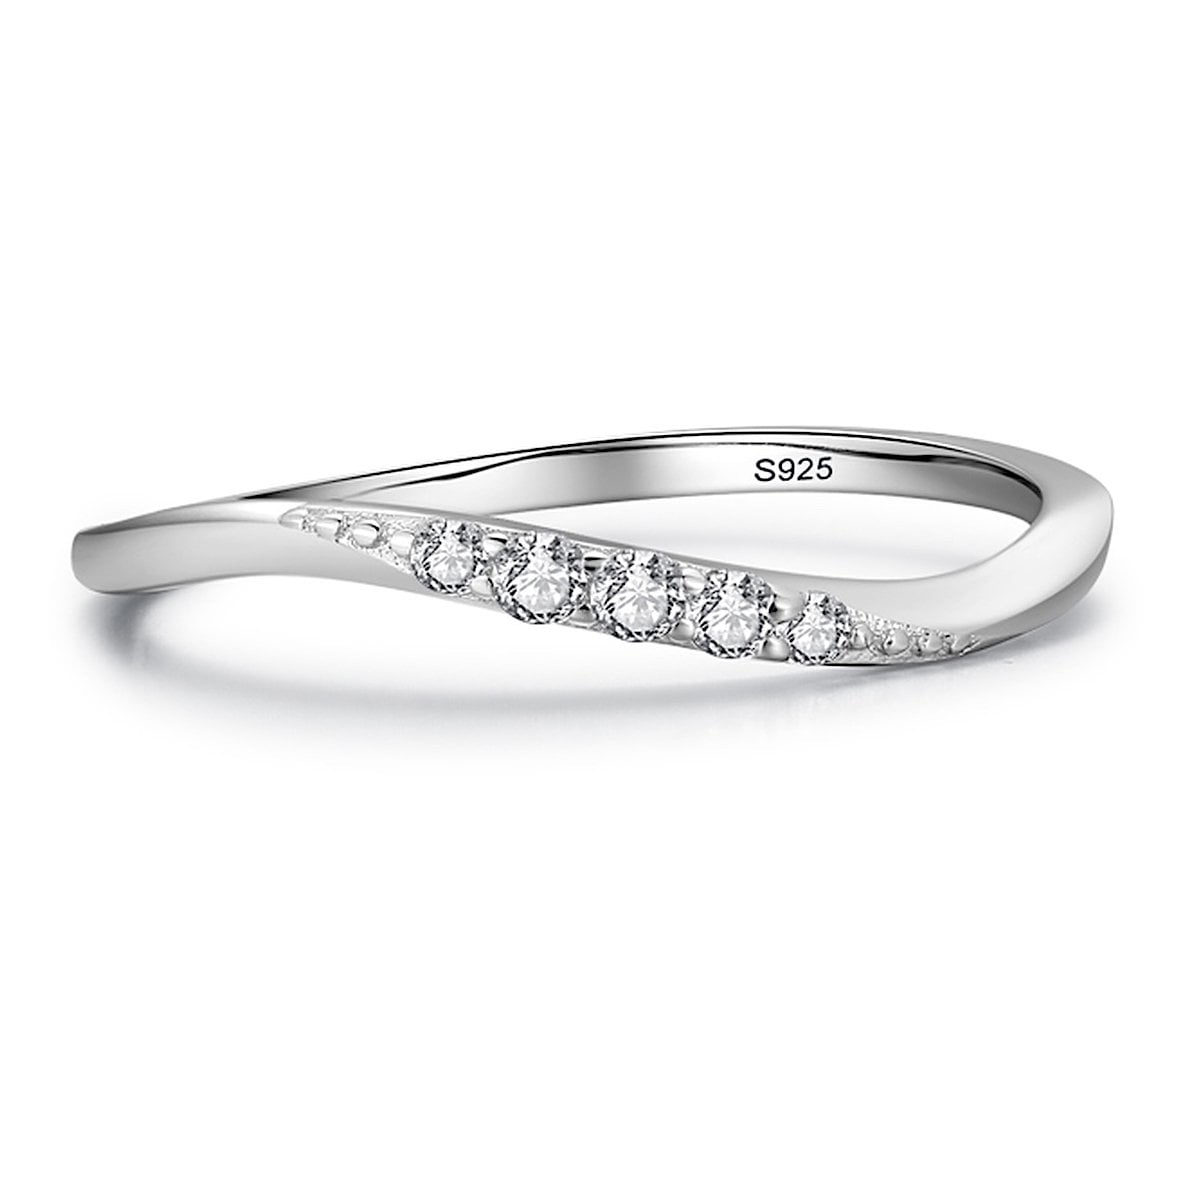 LADIES MEN'S 14K WHITE GOLD ON STERLING SILVER 4 ROW WEDDING CZ'S BAND RING 12MM